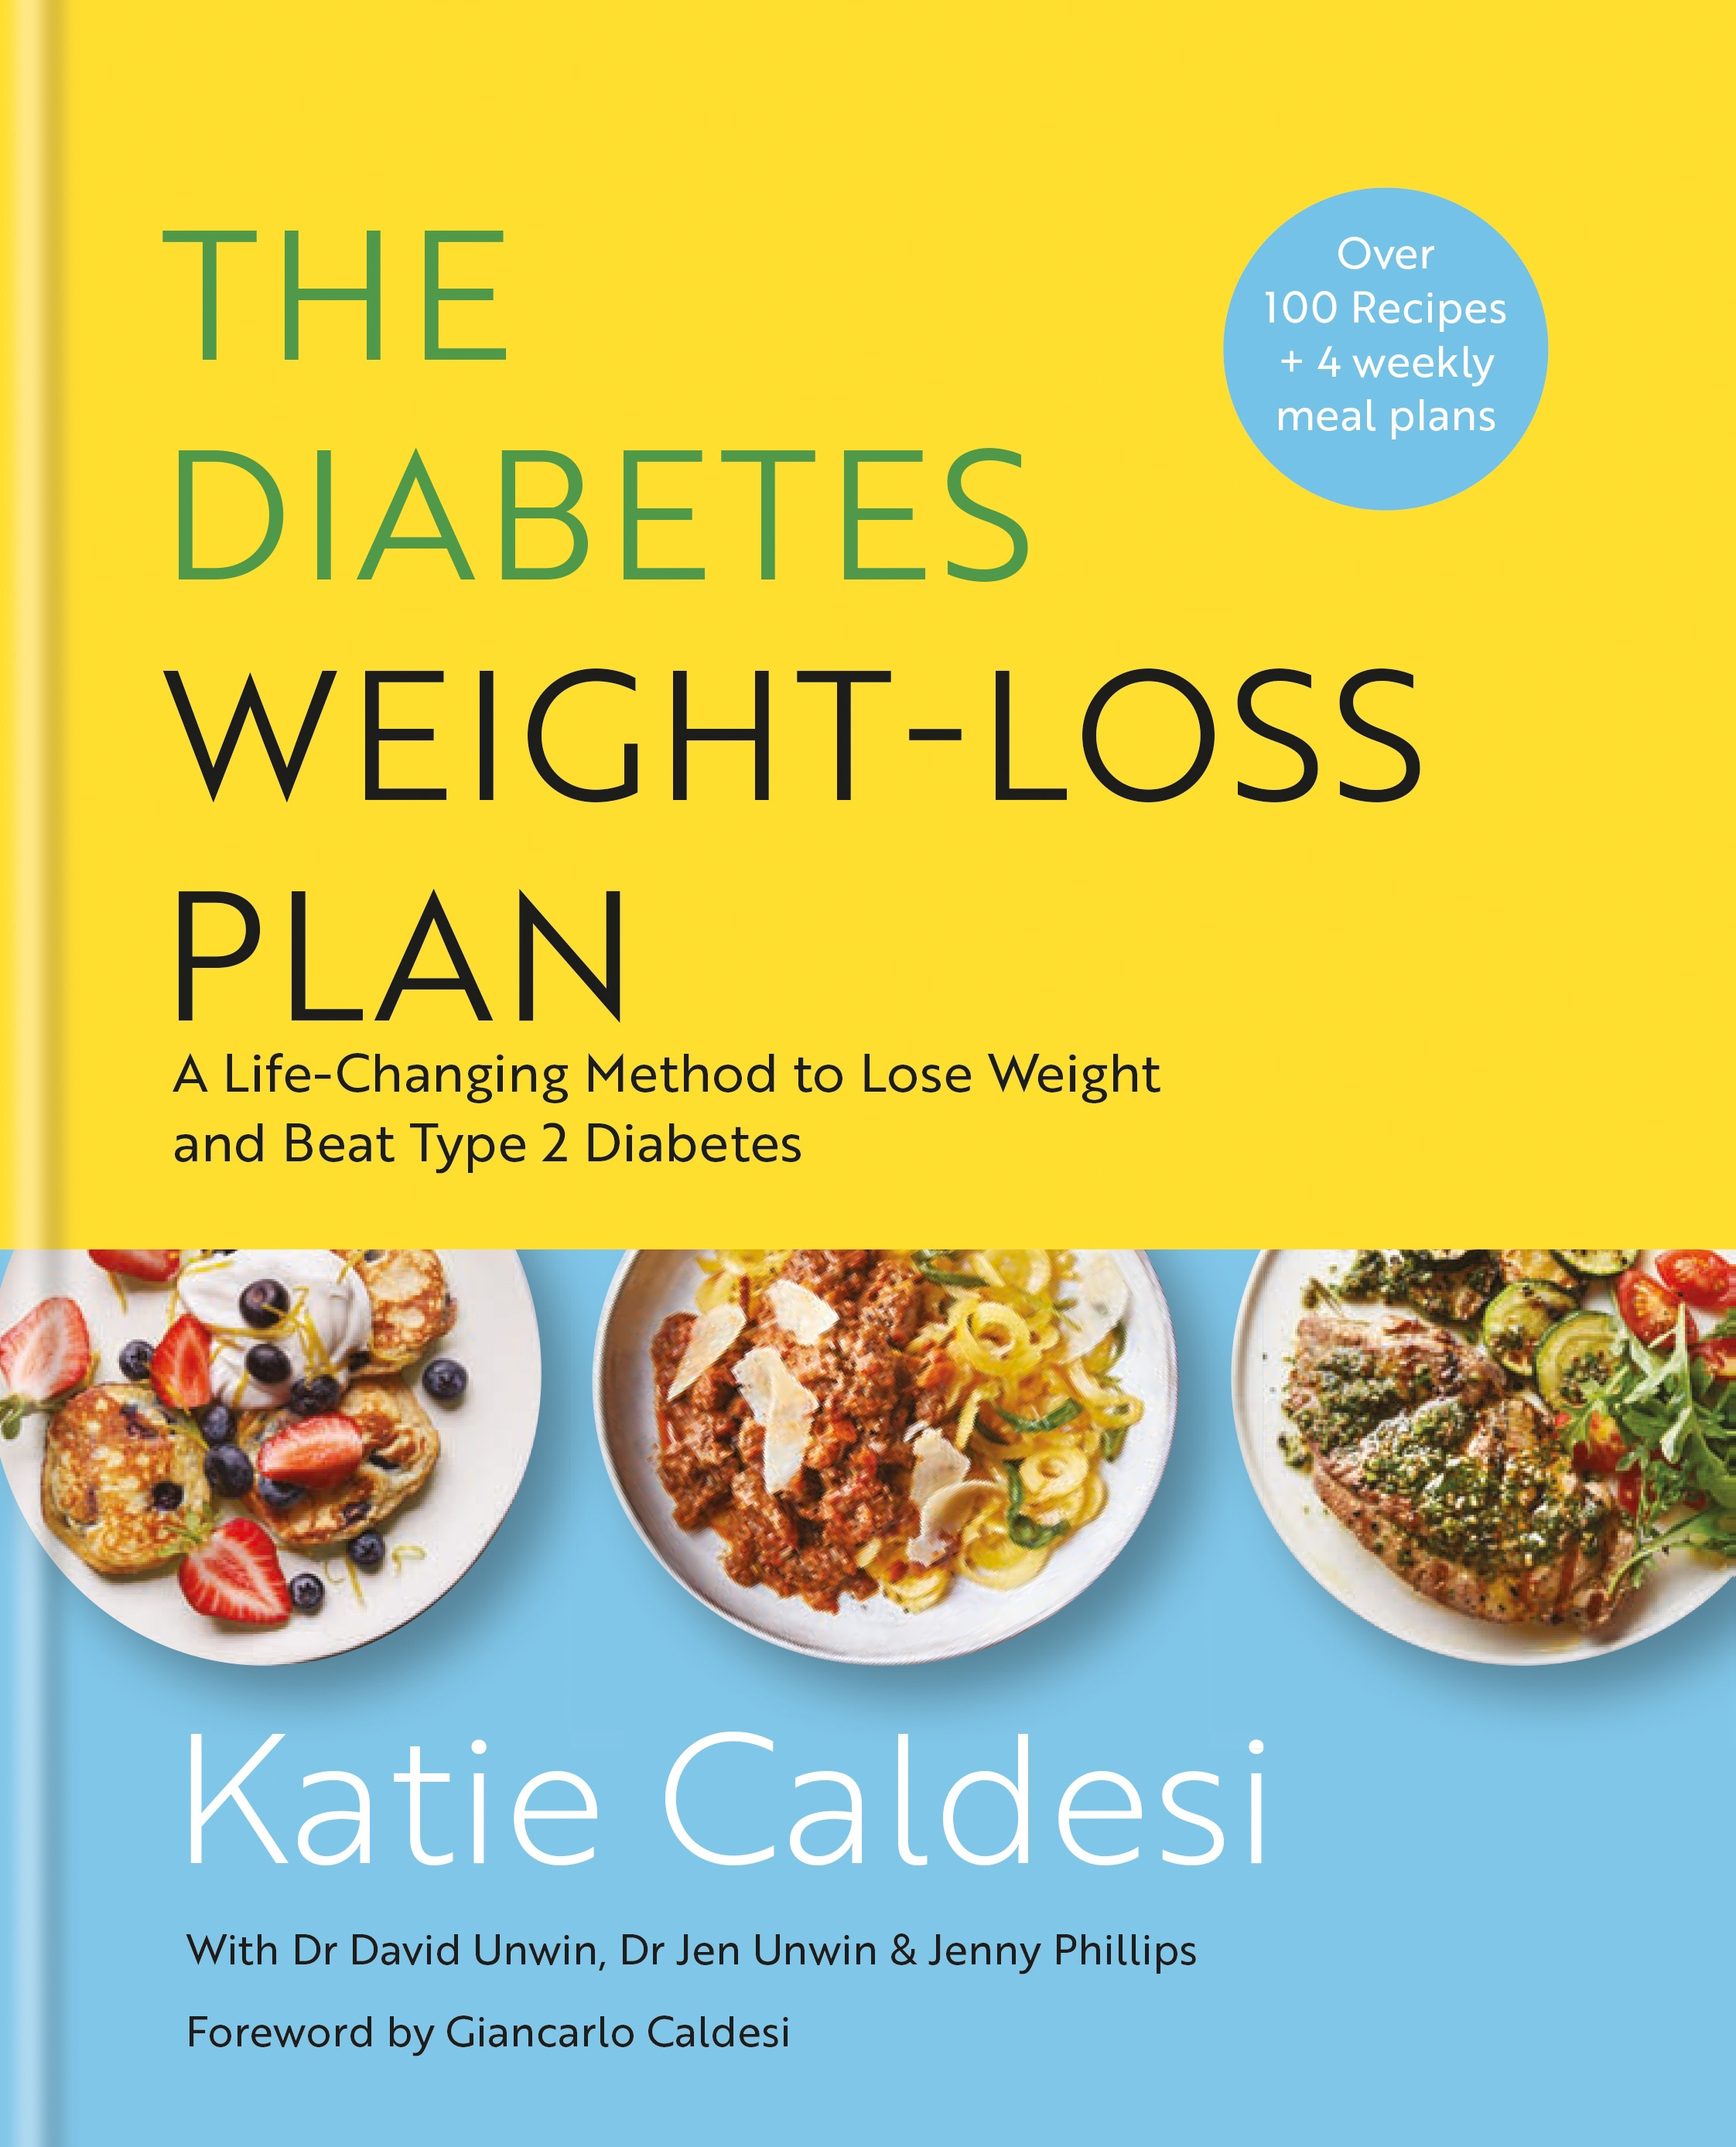 The Diabetes Weight-Loss Plan by Katie Caldesi